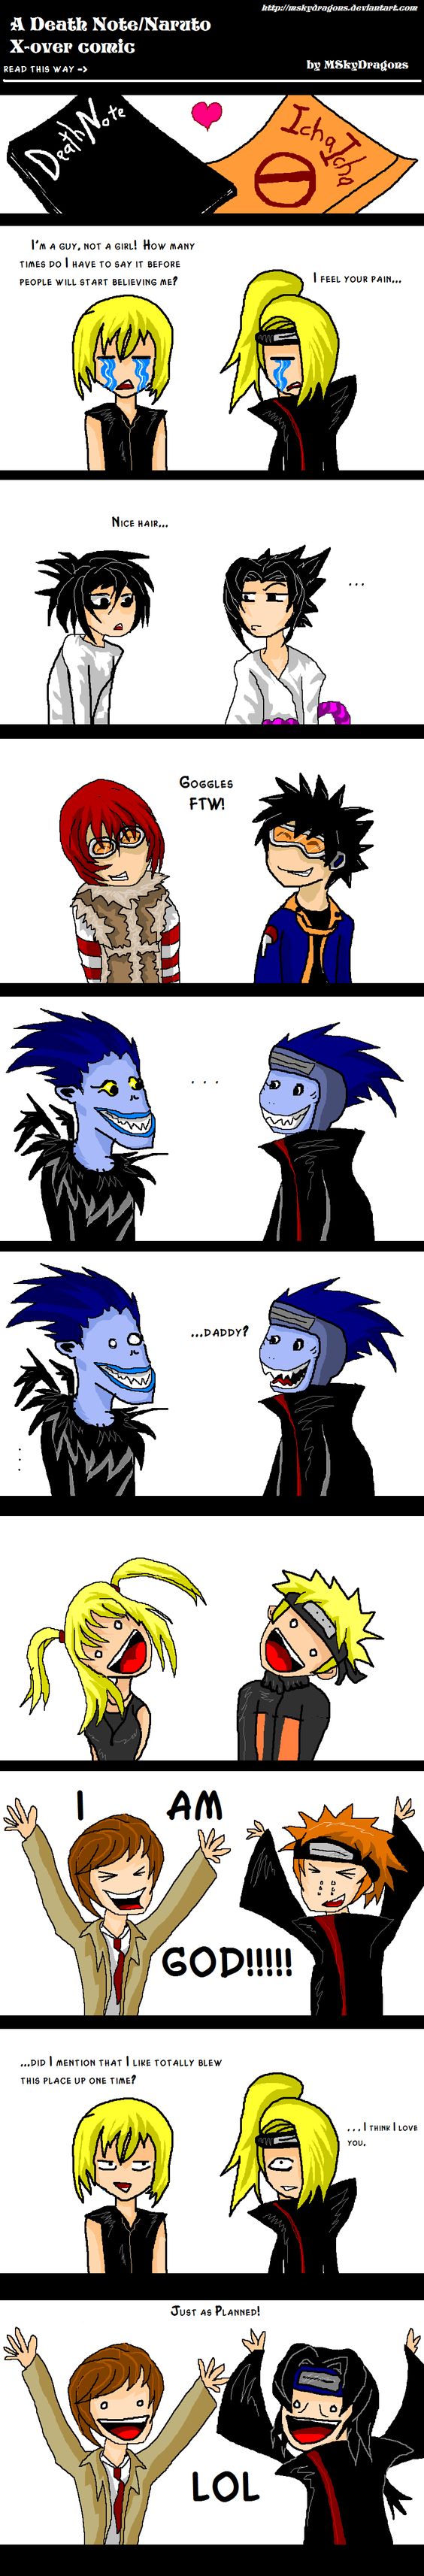 OH MY GOD THIS IS HILARIOUS ONE XD Death Note x Naruto